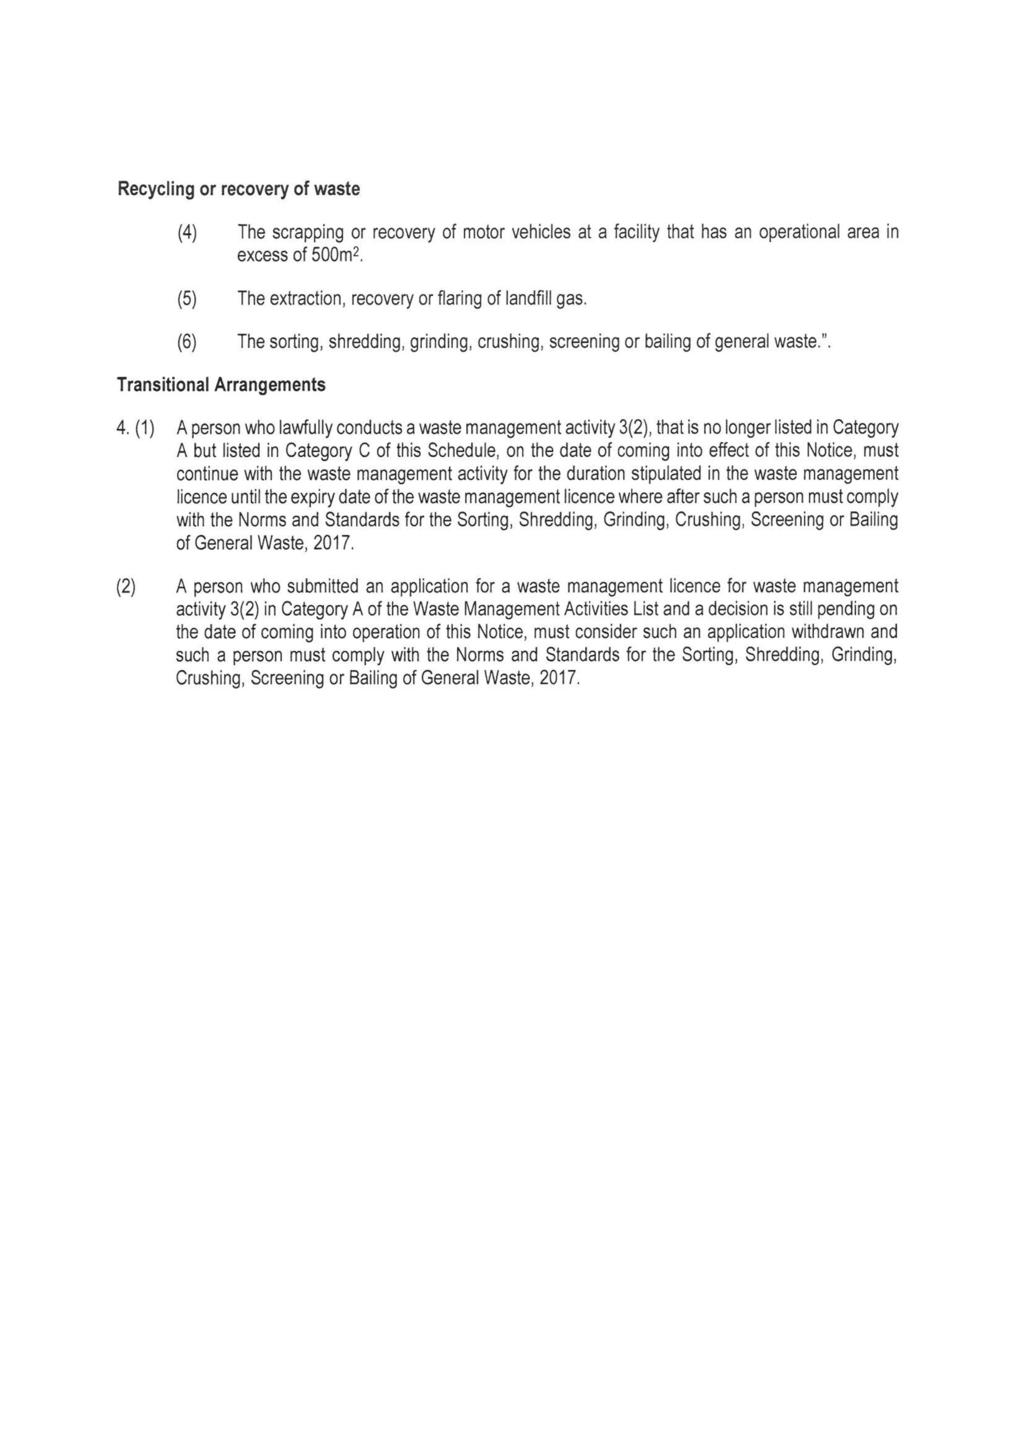 6 No. 40698 GOVERNMENT GAZETTE, 17 MARCH 2017 Recycling or recovery of waste (4) The scrapping or recovery of motor vehicles at a facility that has an operational area in excess of 500m2.